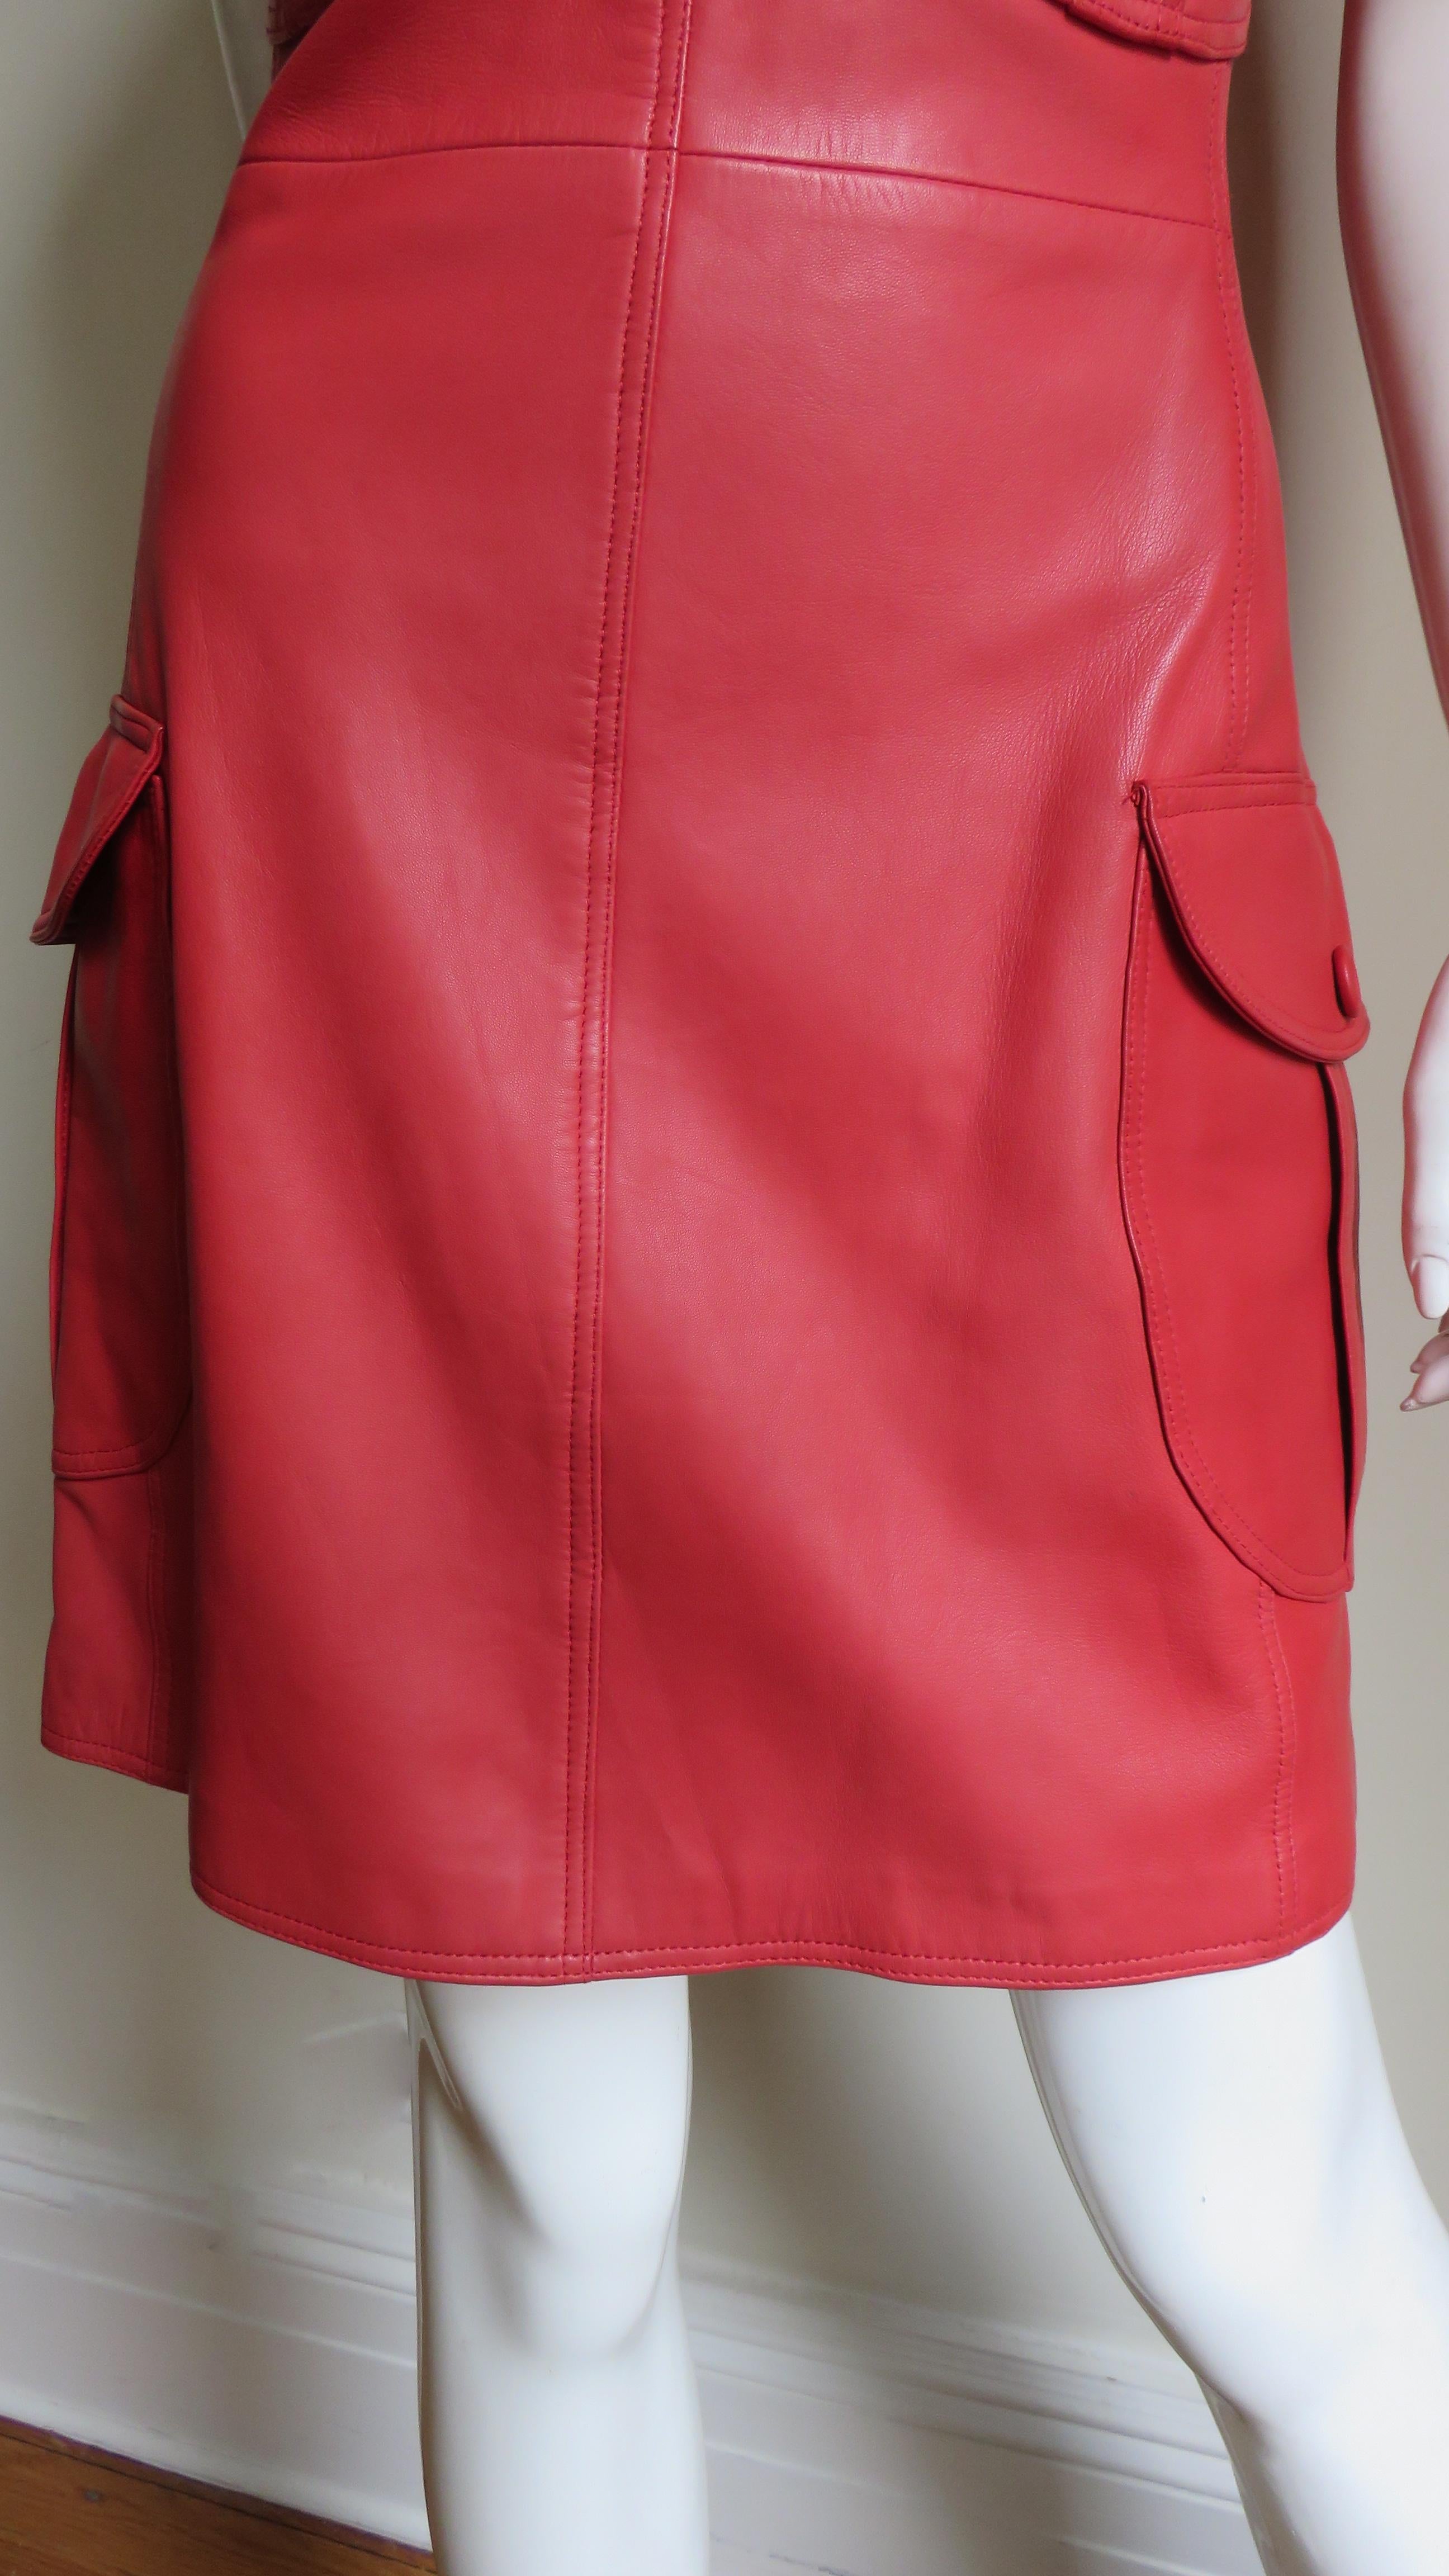 Gianni Versace New F/W 1996 Red Leather Dress In Excellent Condition For Sale In Water Mill, NY